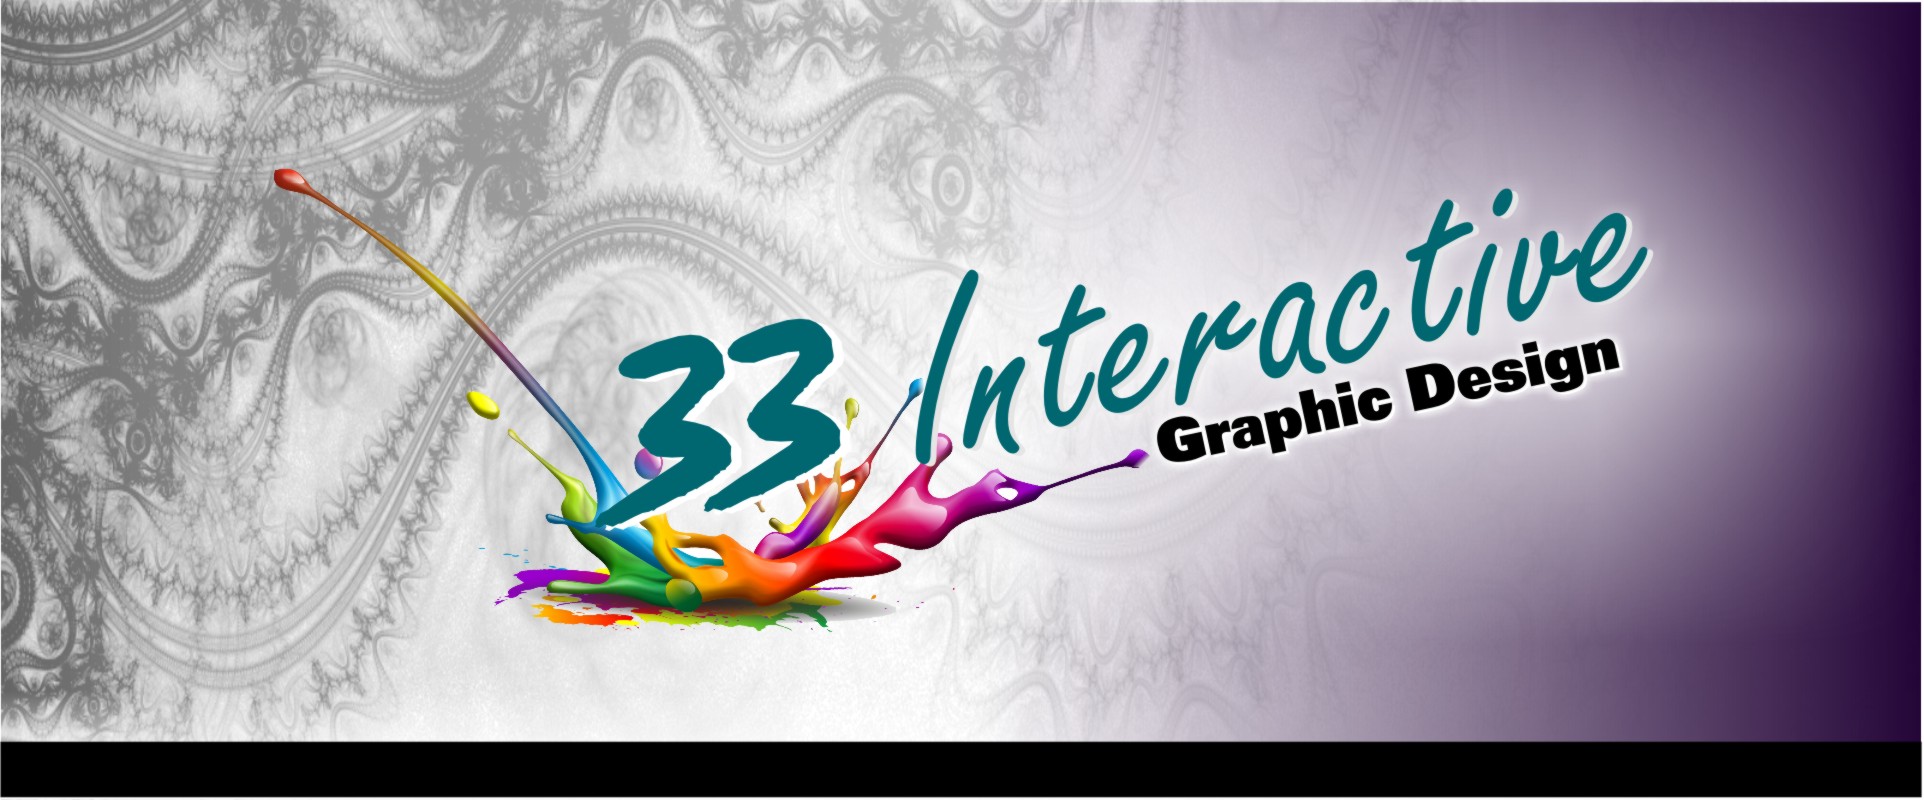 33 Interactive - Graphic Design Landing page Banner